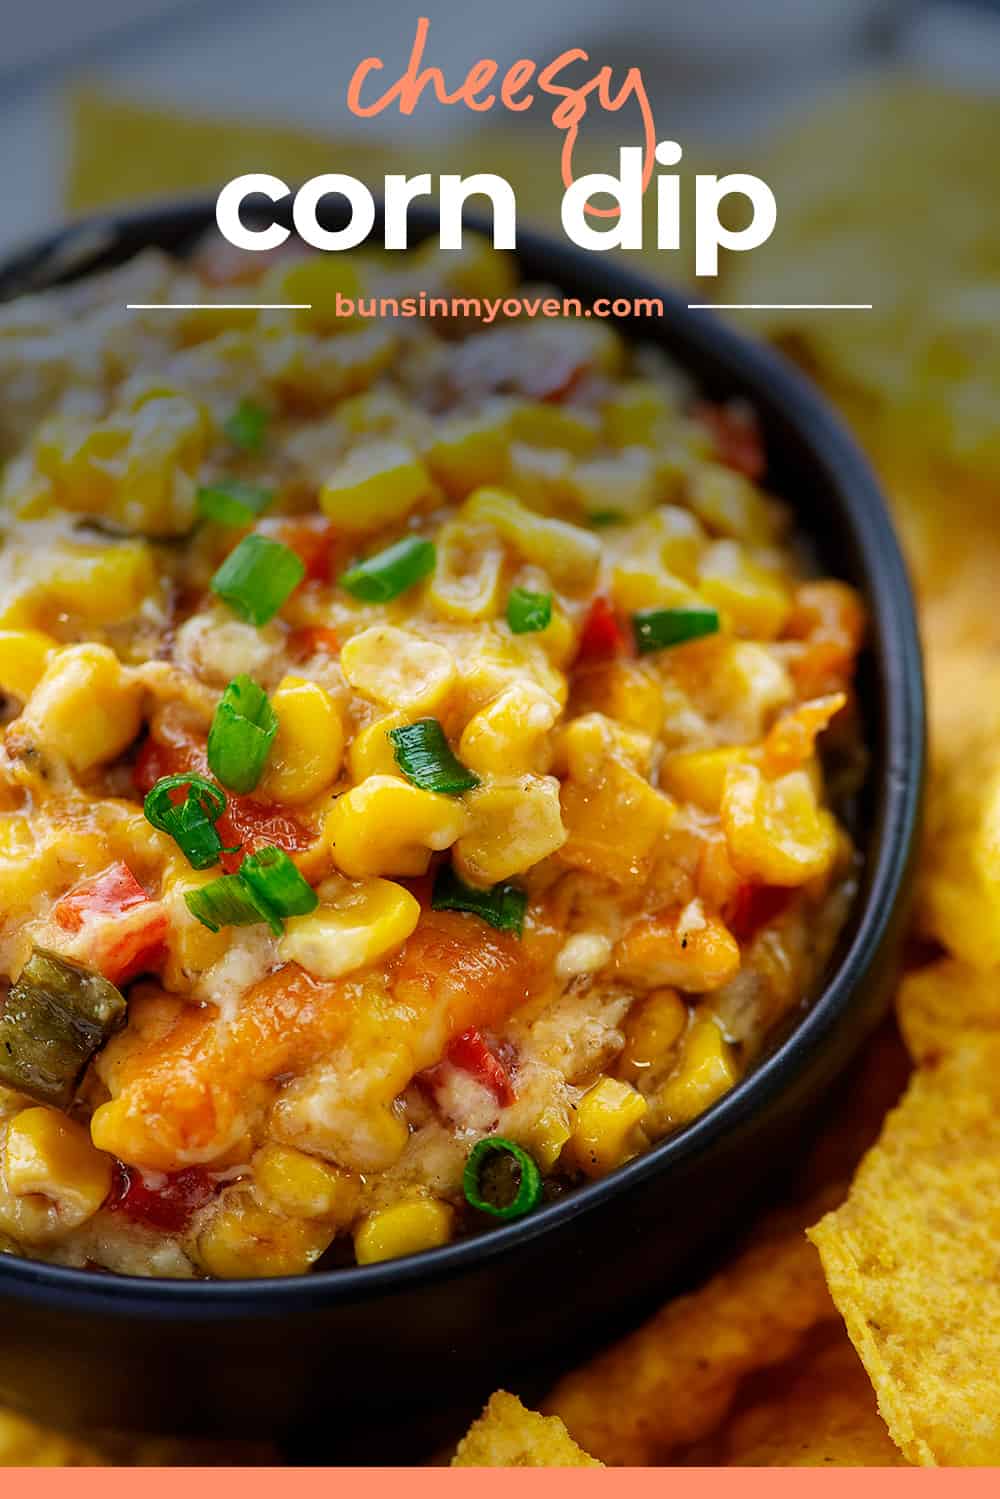 Hot corn dip in black bowl with text for Pinterest.